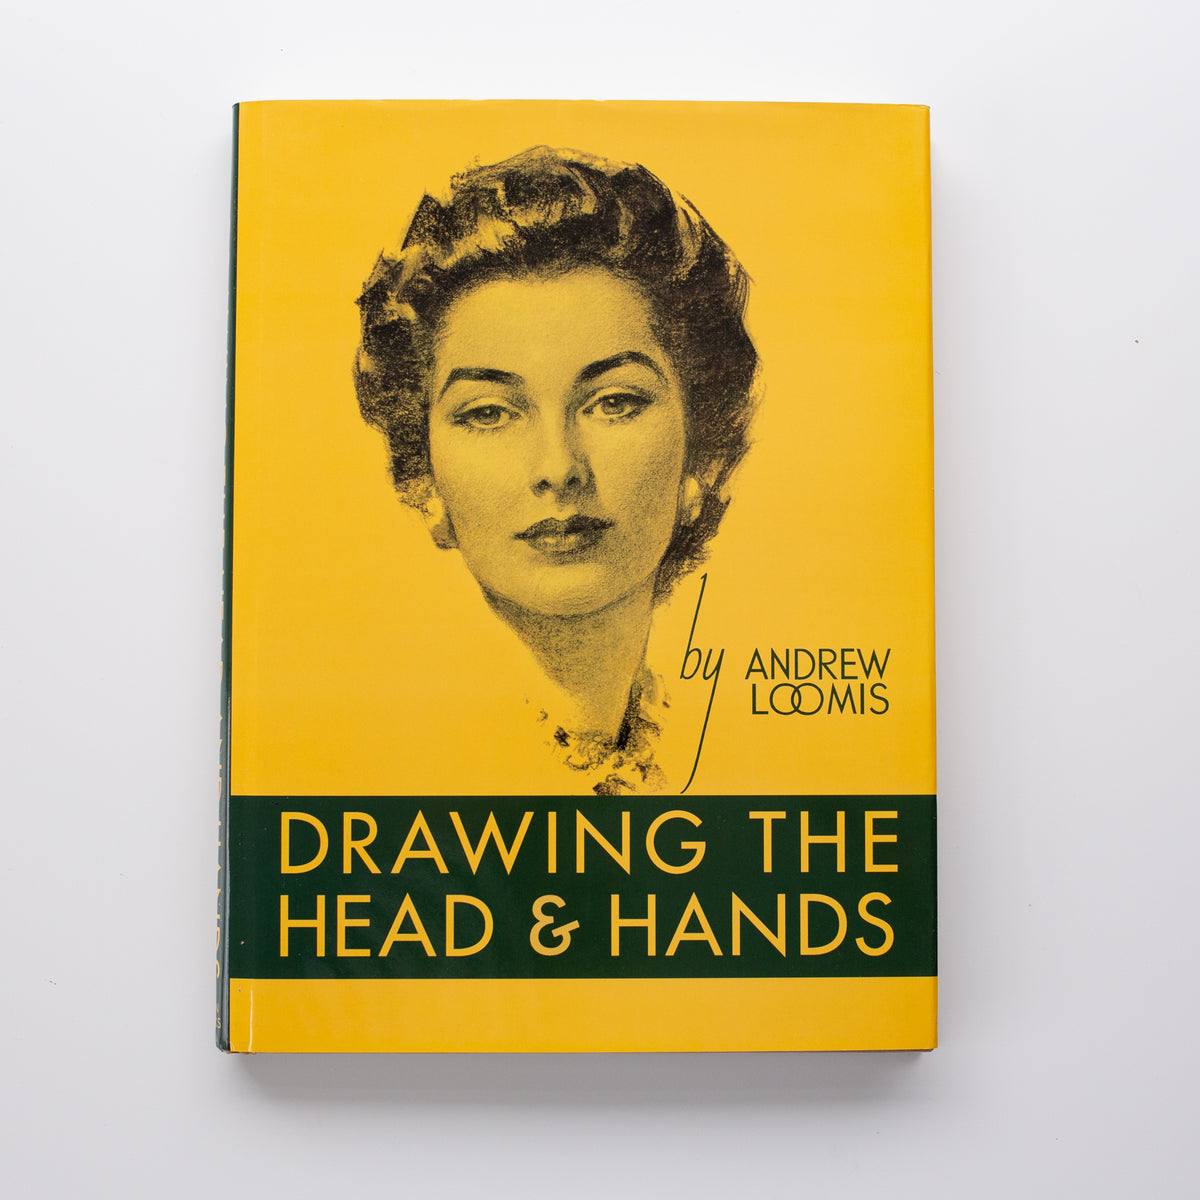 Drawing the Heads and Hands' by Andrew Loomis